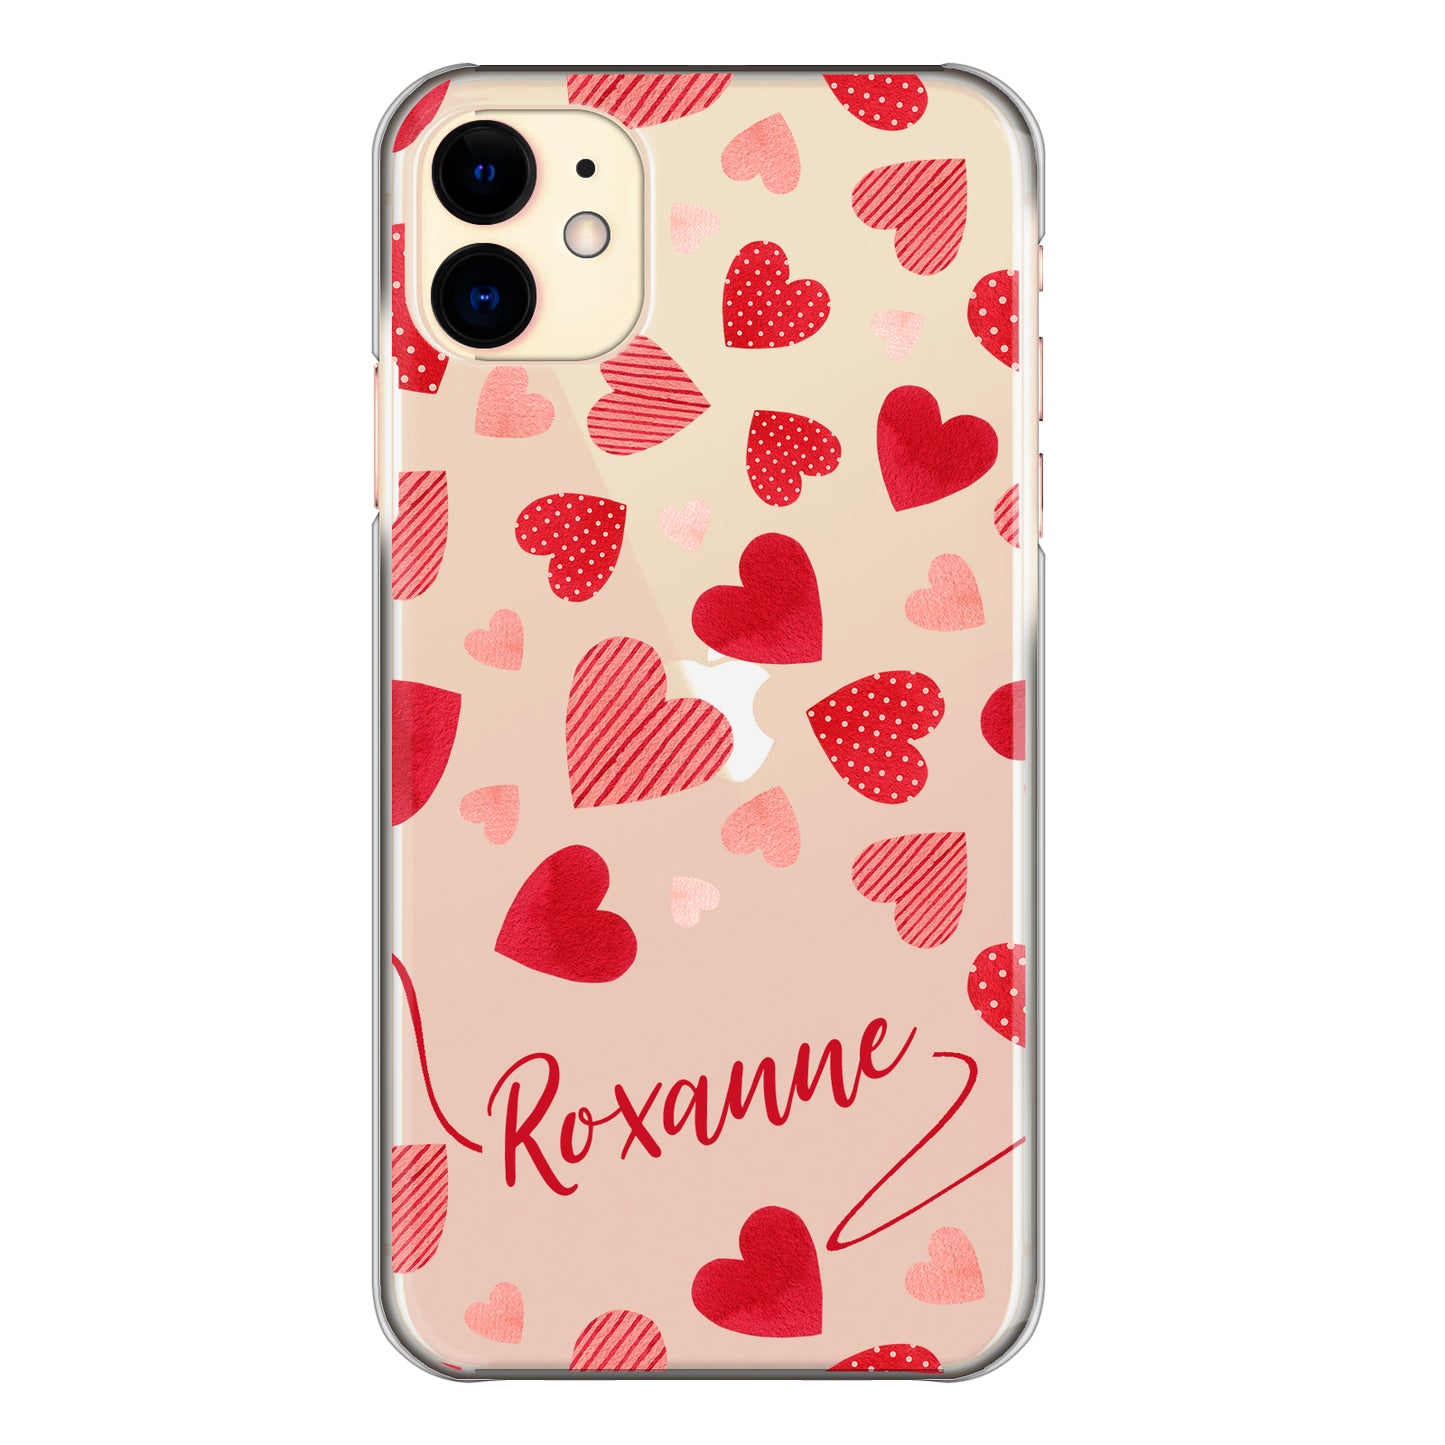 Personalised Oppo Phone Hard Case with Polka Dot/Striped Hearts and Stylish Text